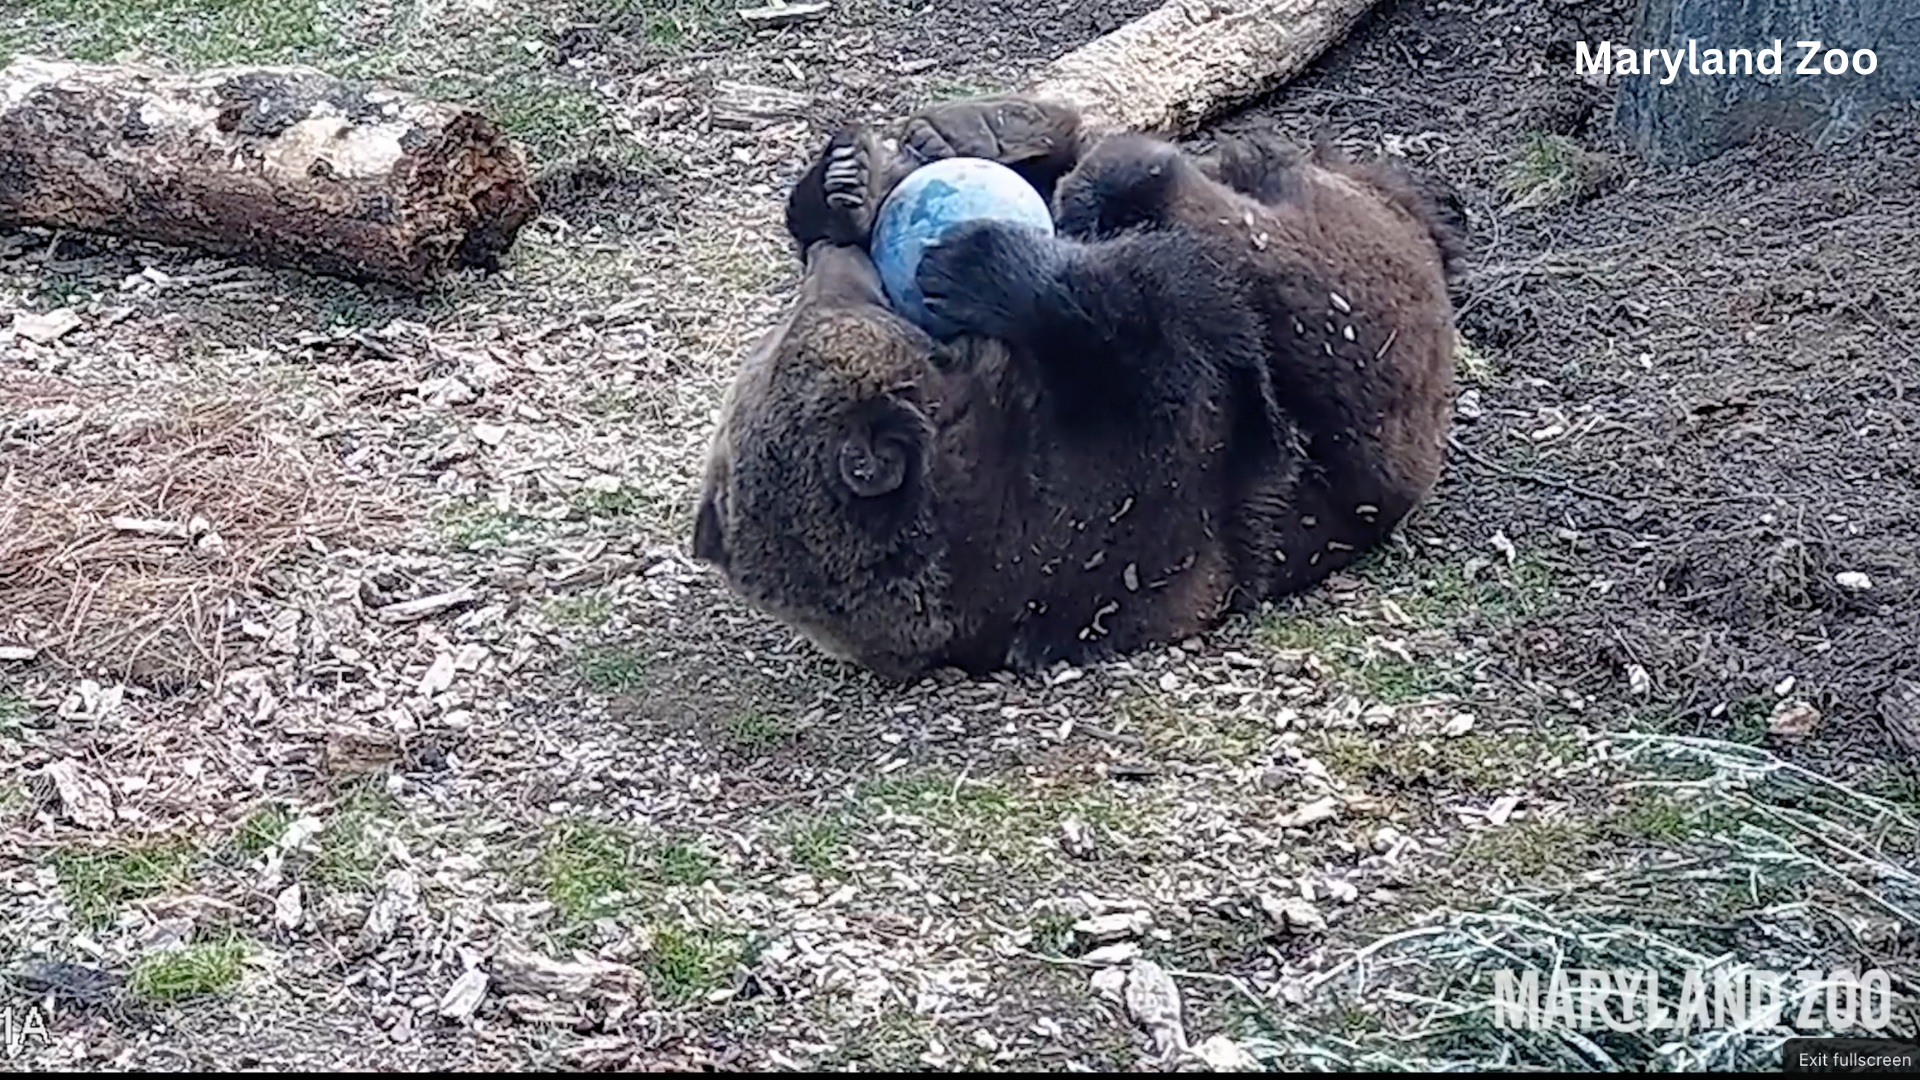 Grizzly Bear plays with a ball